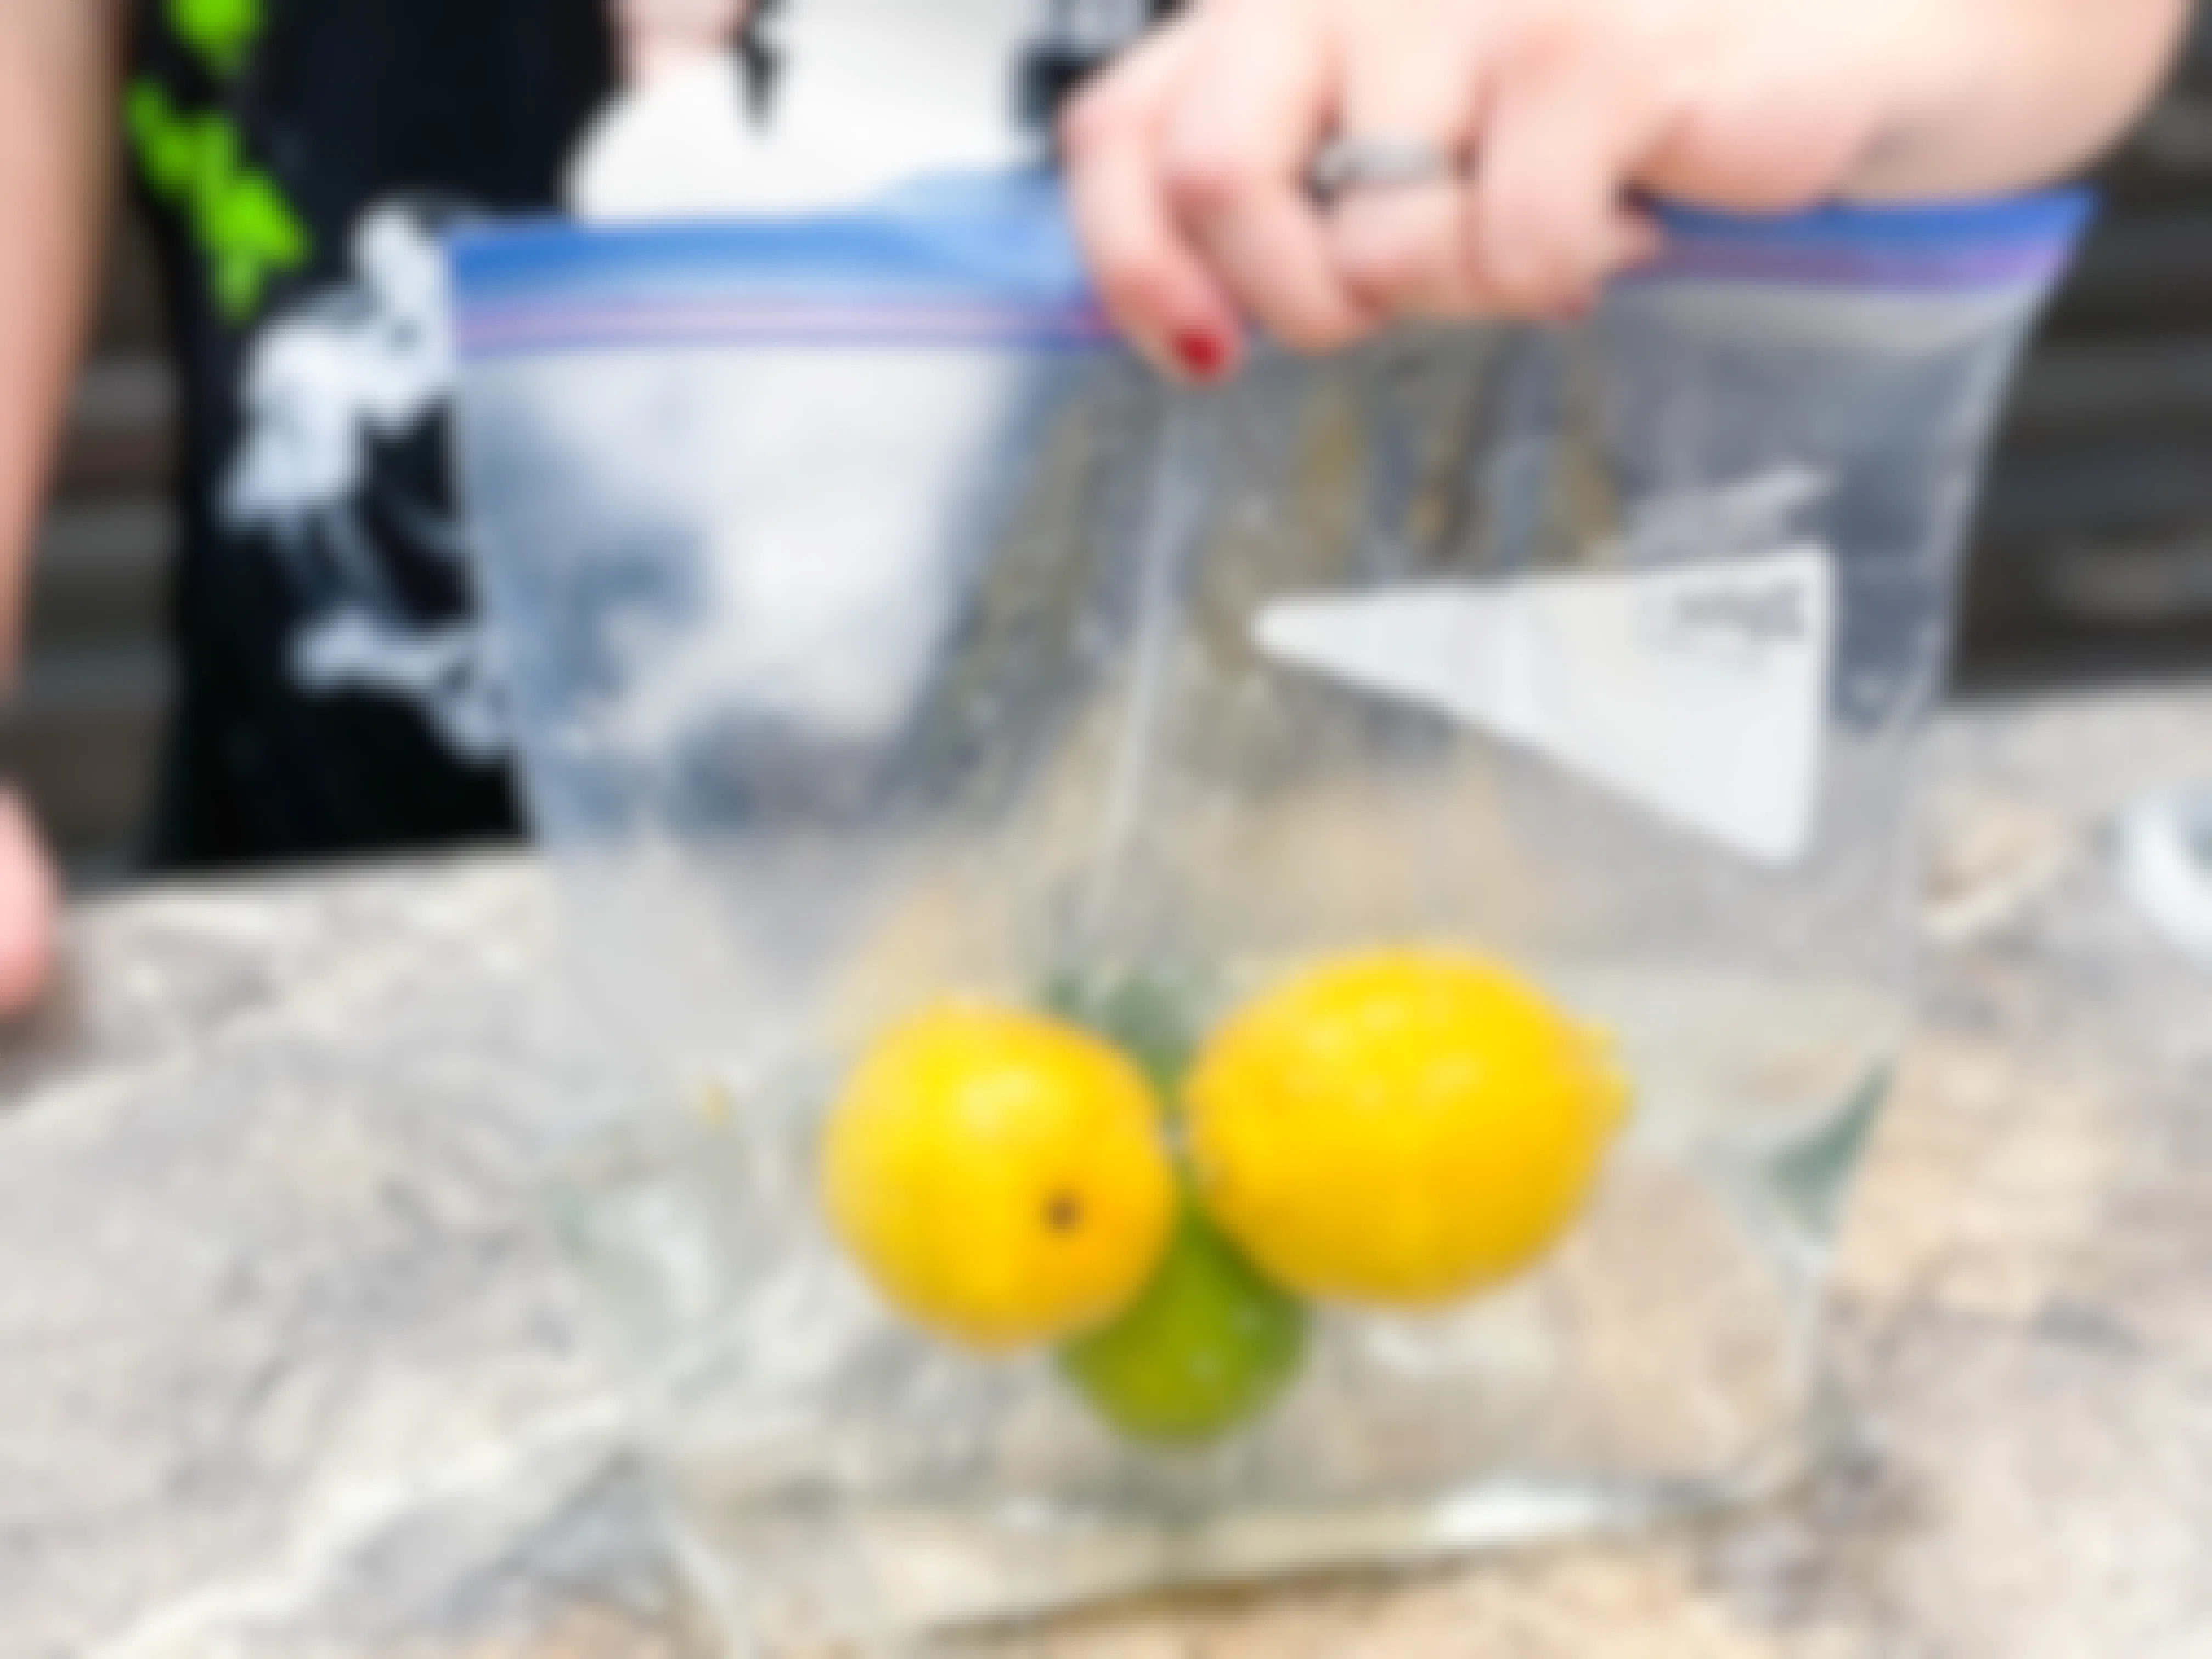 lemons and limes in a bag of water